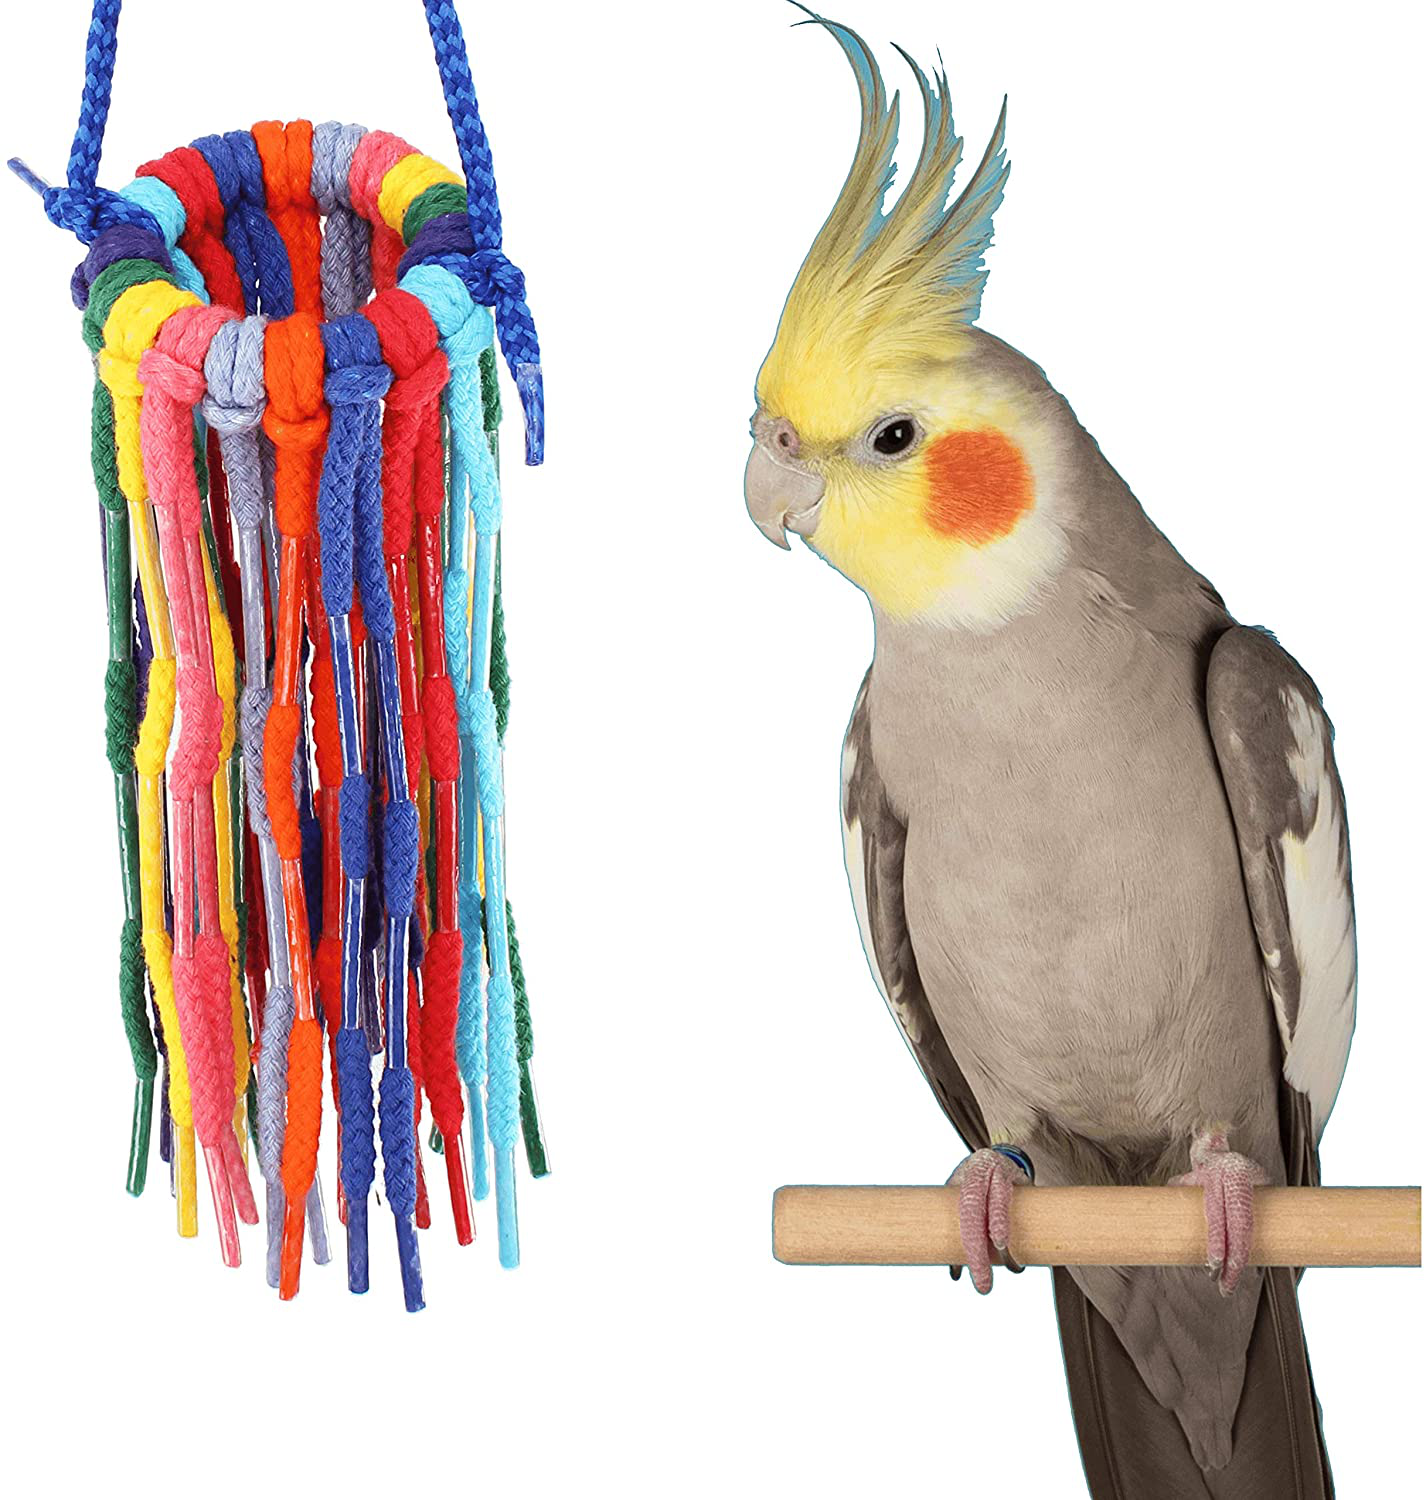 Bonka Bird Toys Aglet Cotton Colorful Chew Pull Parrot Parrotlet Quaker Budgie Finch Macaw Cockatoo